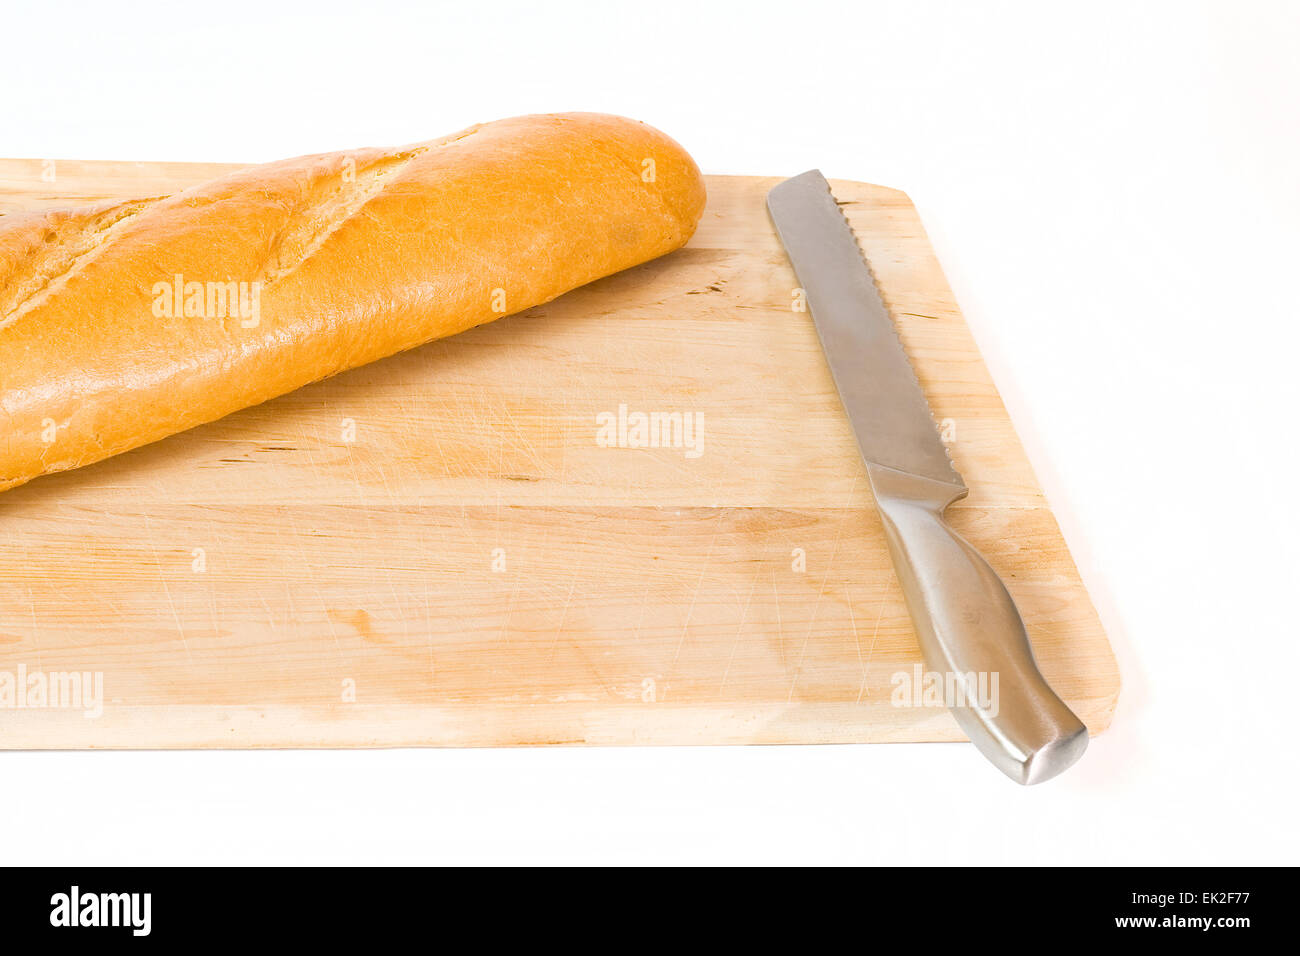 Loaf of fresh baked bread with a knife on a cutting board Stock Photo